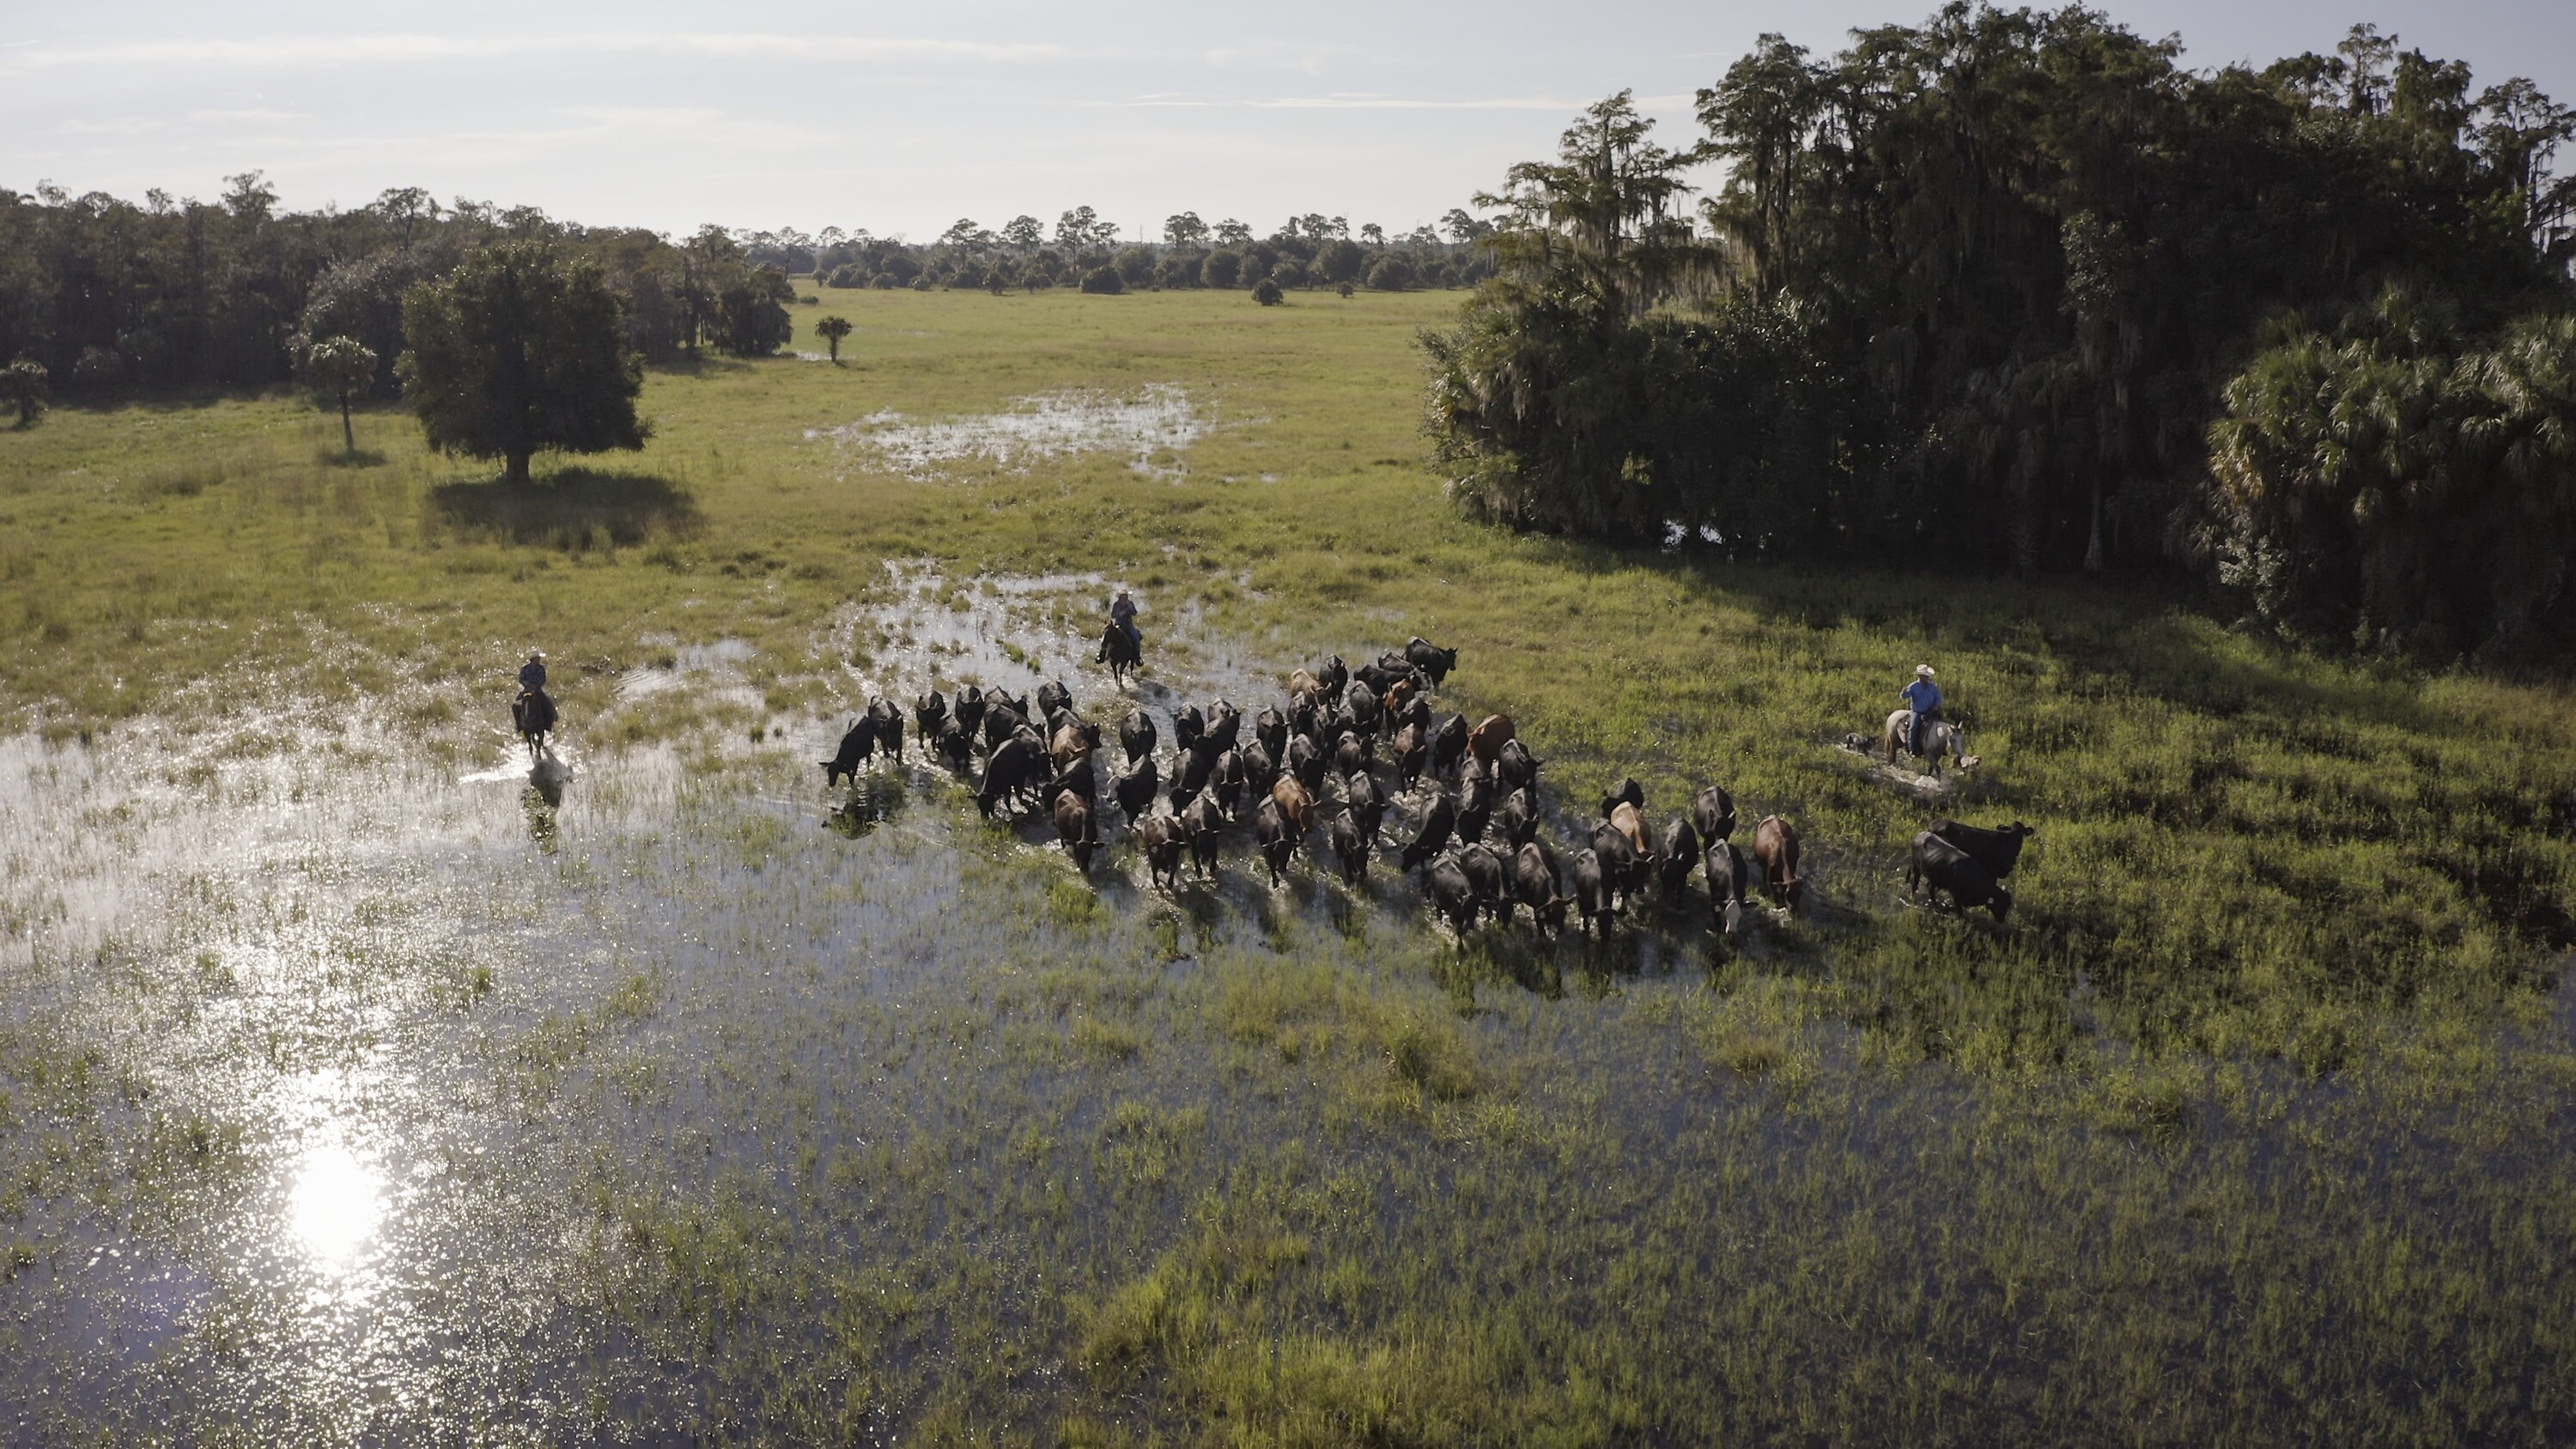 Cowboys herd their cattle through marshland. This is an old Floridian tradition but ranchers also help protect pristine swamplands from being lost to urban development. (National Geographic/Austin Ferguson)